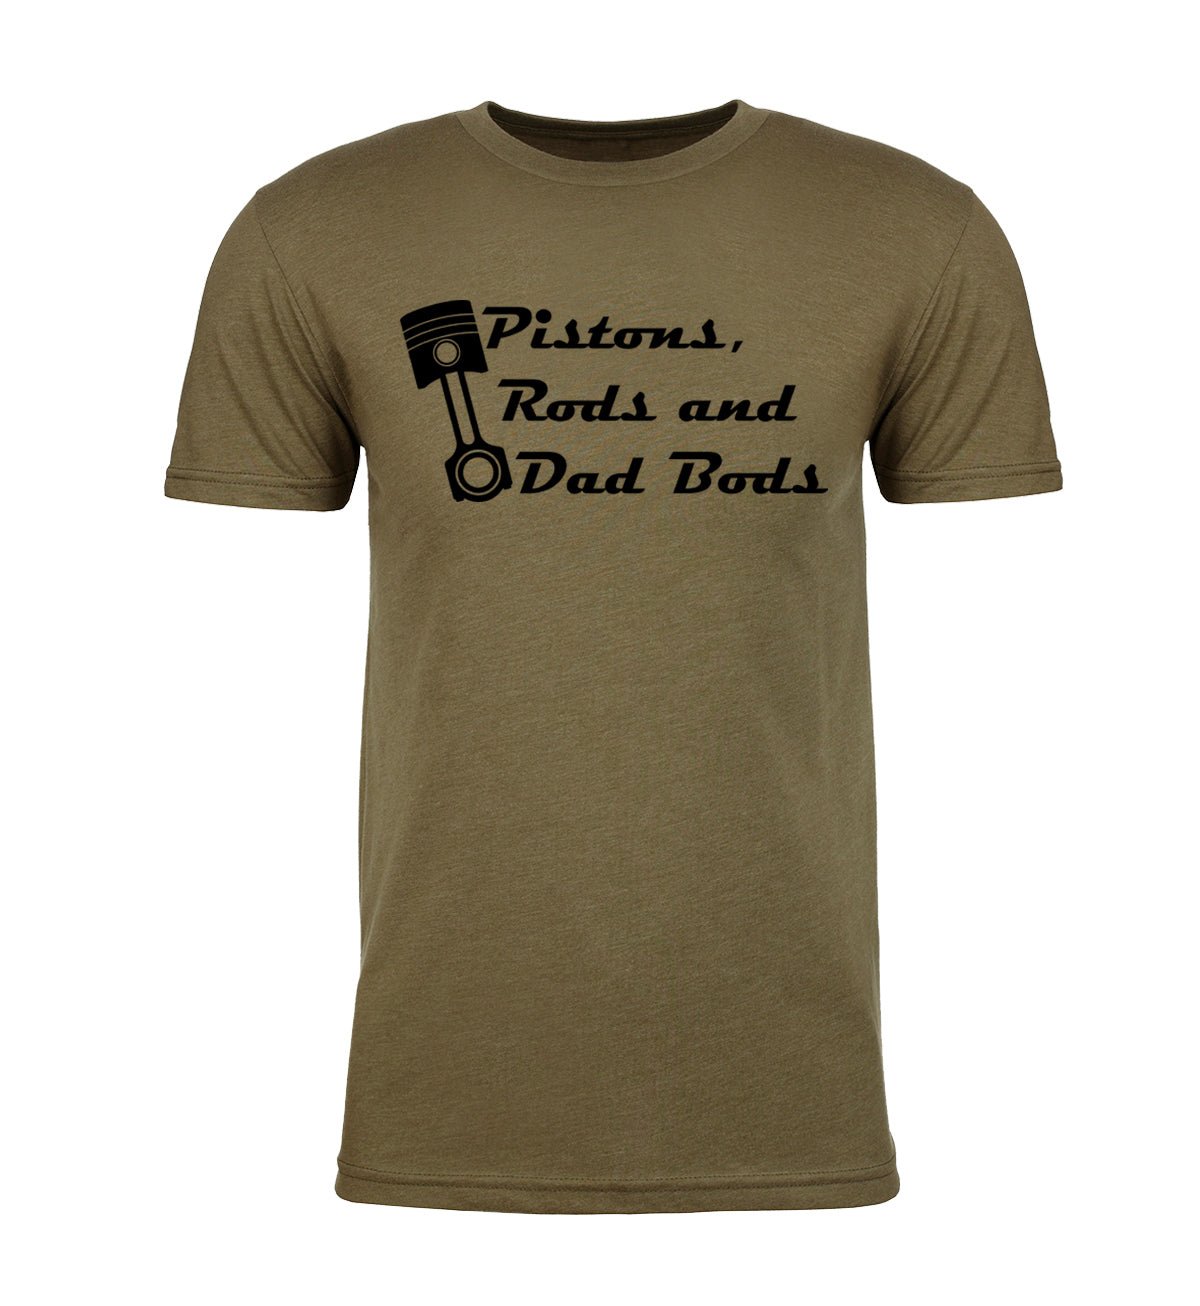 Pistons, Rods and Dad Bods - Classic Car Text - Unisex T Shirts - Mato & Hash